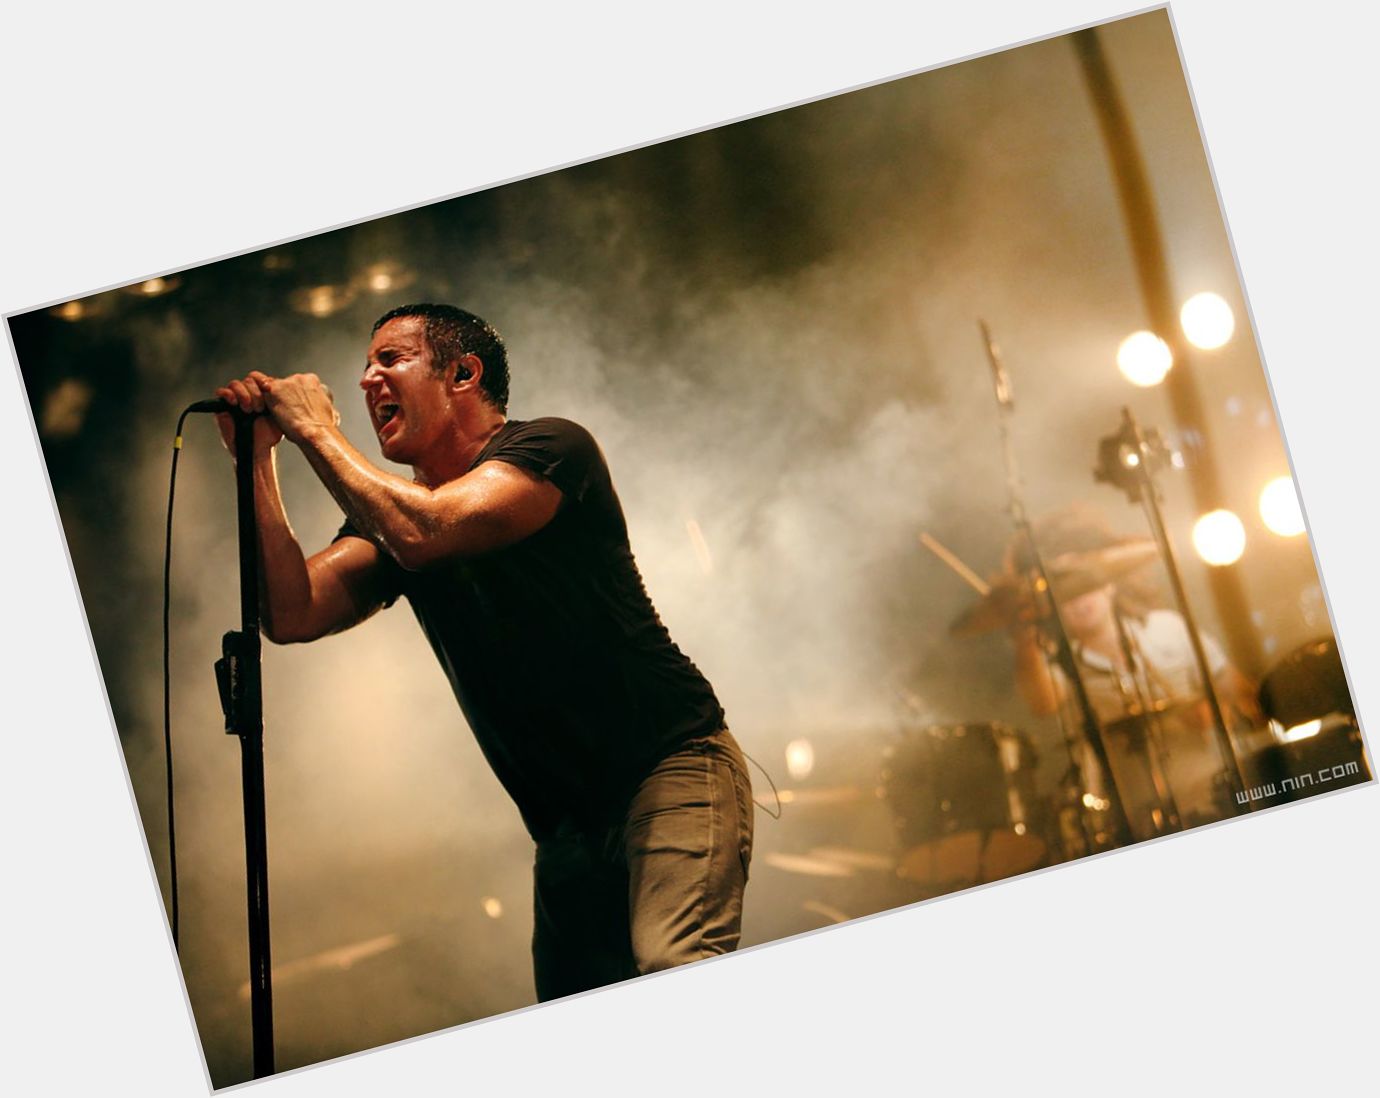 Another date full of massive birthdays and releases, May 17. Happy birthday to icon Trent Reznor! 